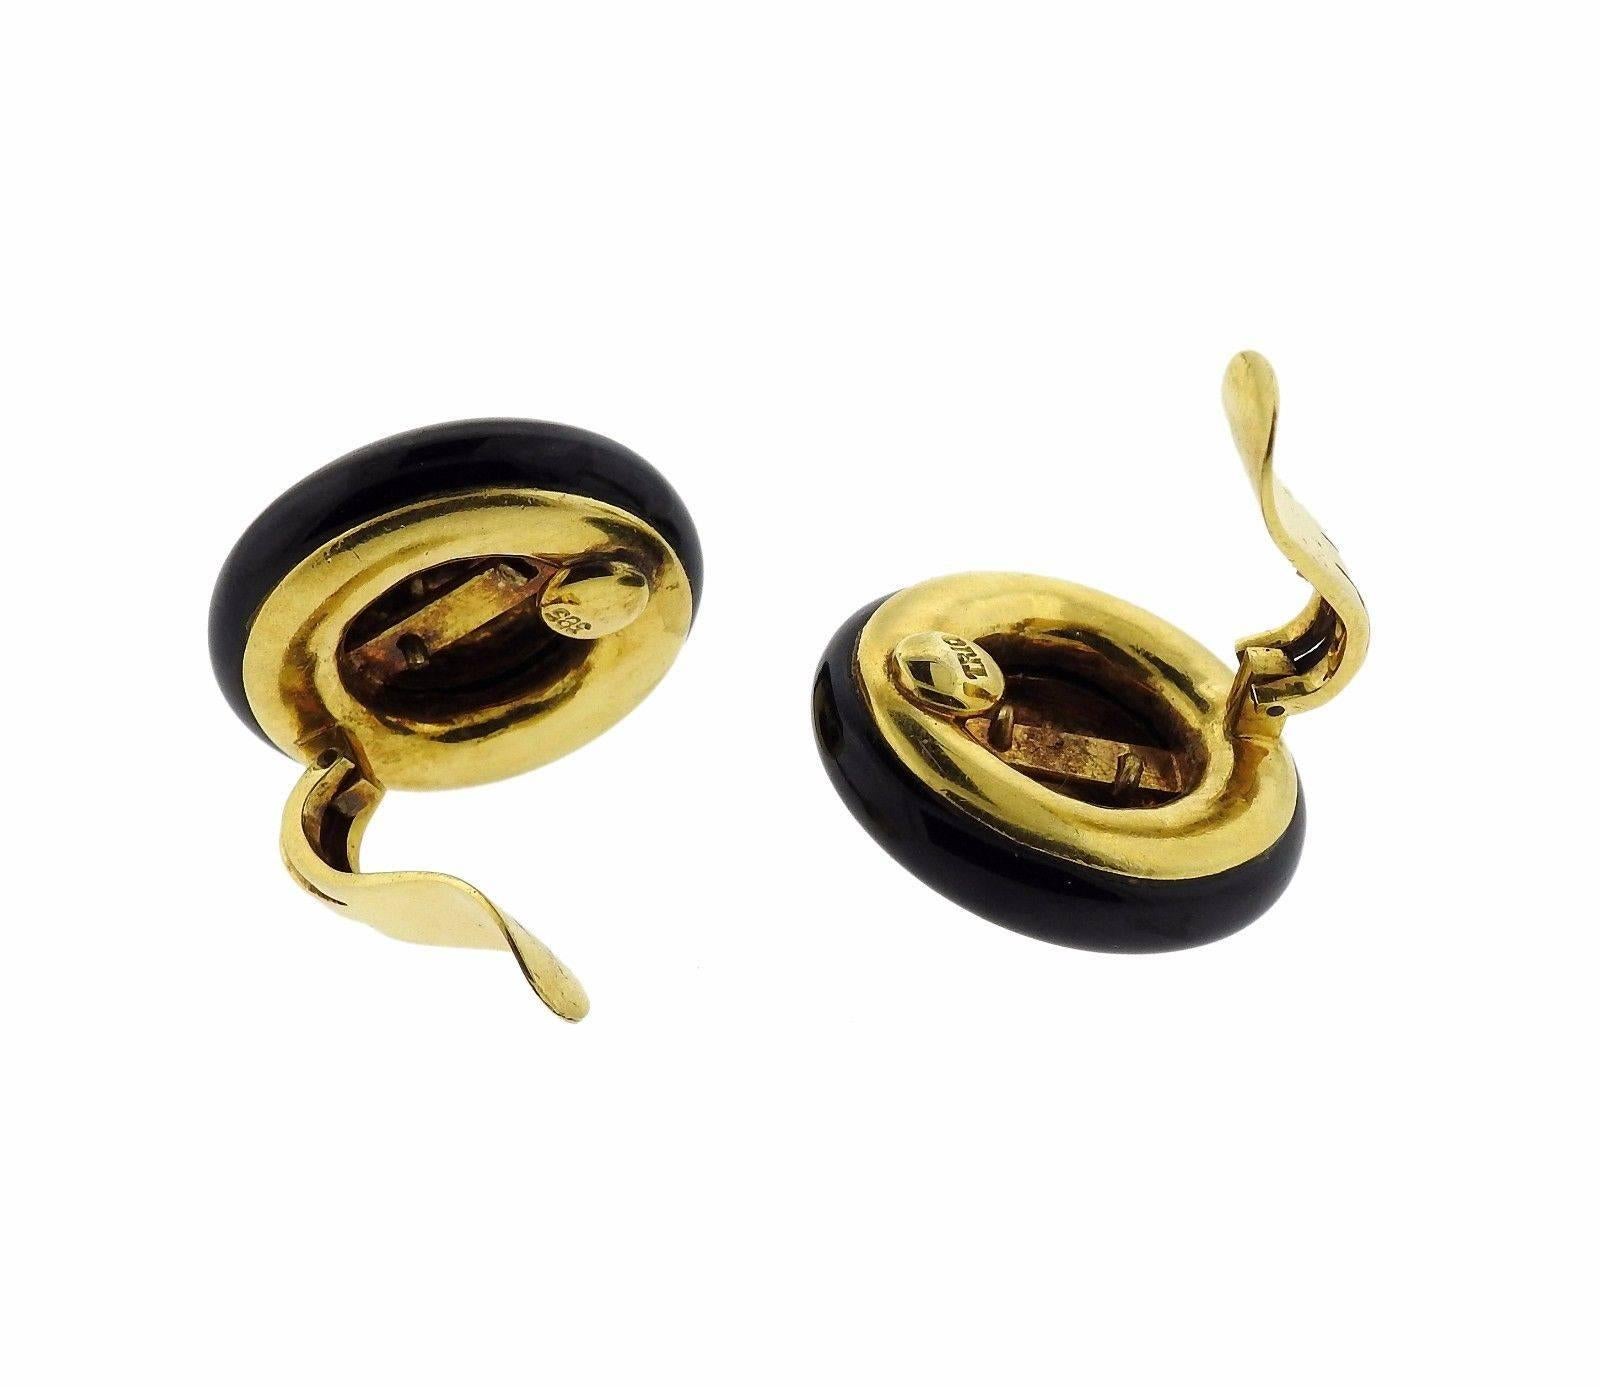 A pair of 14k yellow gold earrings set with onyx.  Crafted by Trio, the earrings measure 25mm in diameter and weigh 32 grams.  Marked: 585, Trio.